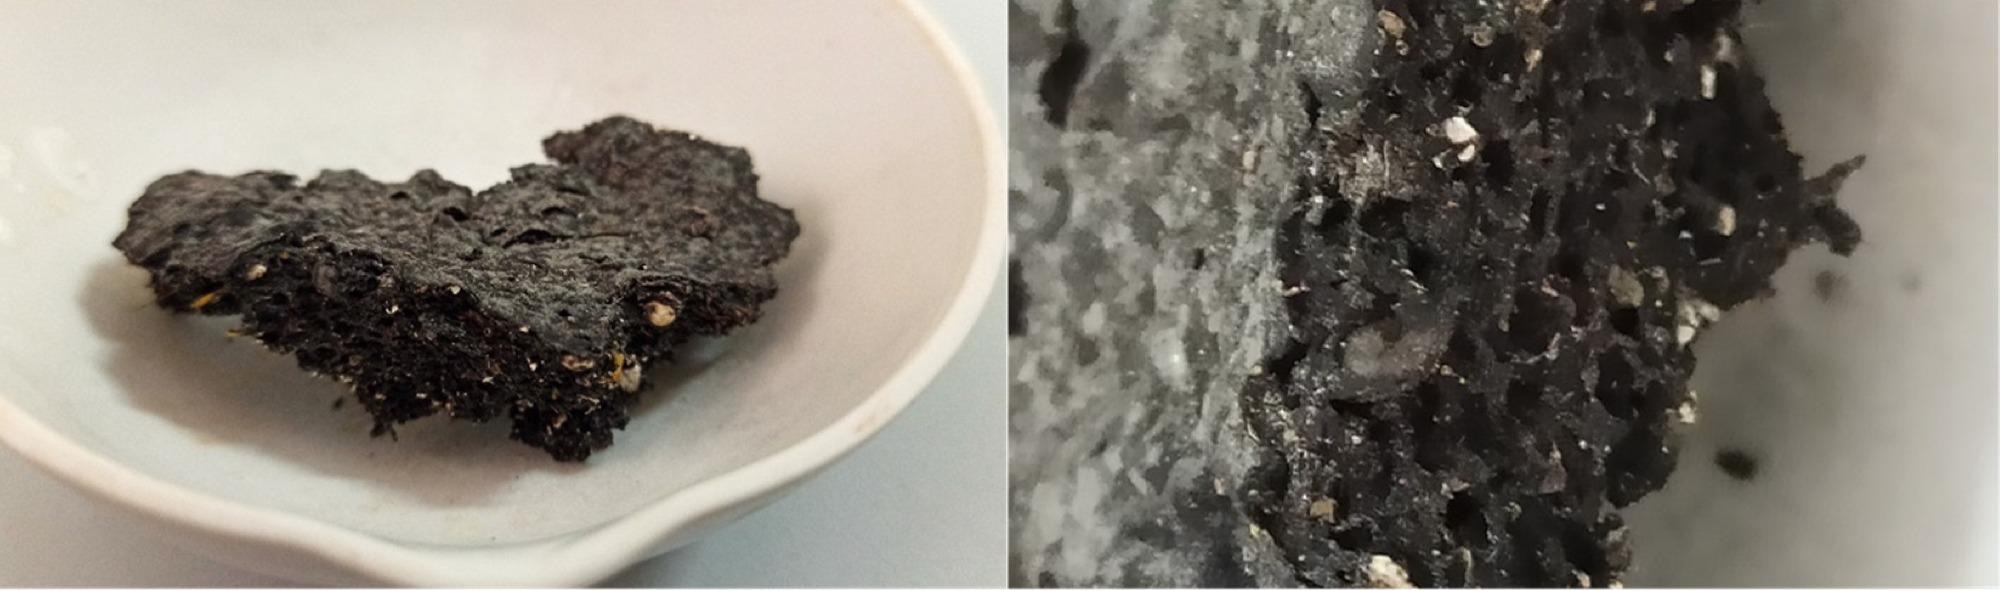 Pictures of the dried sludge at the end of the experiments.